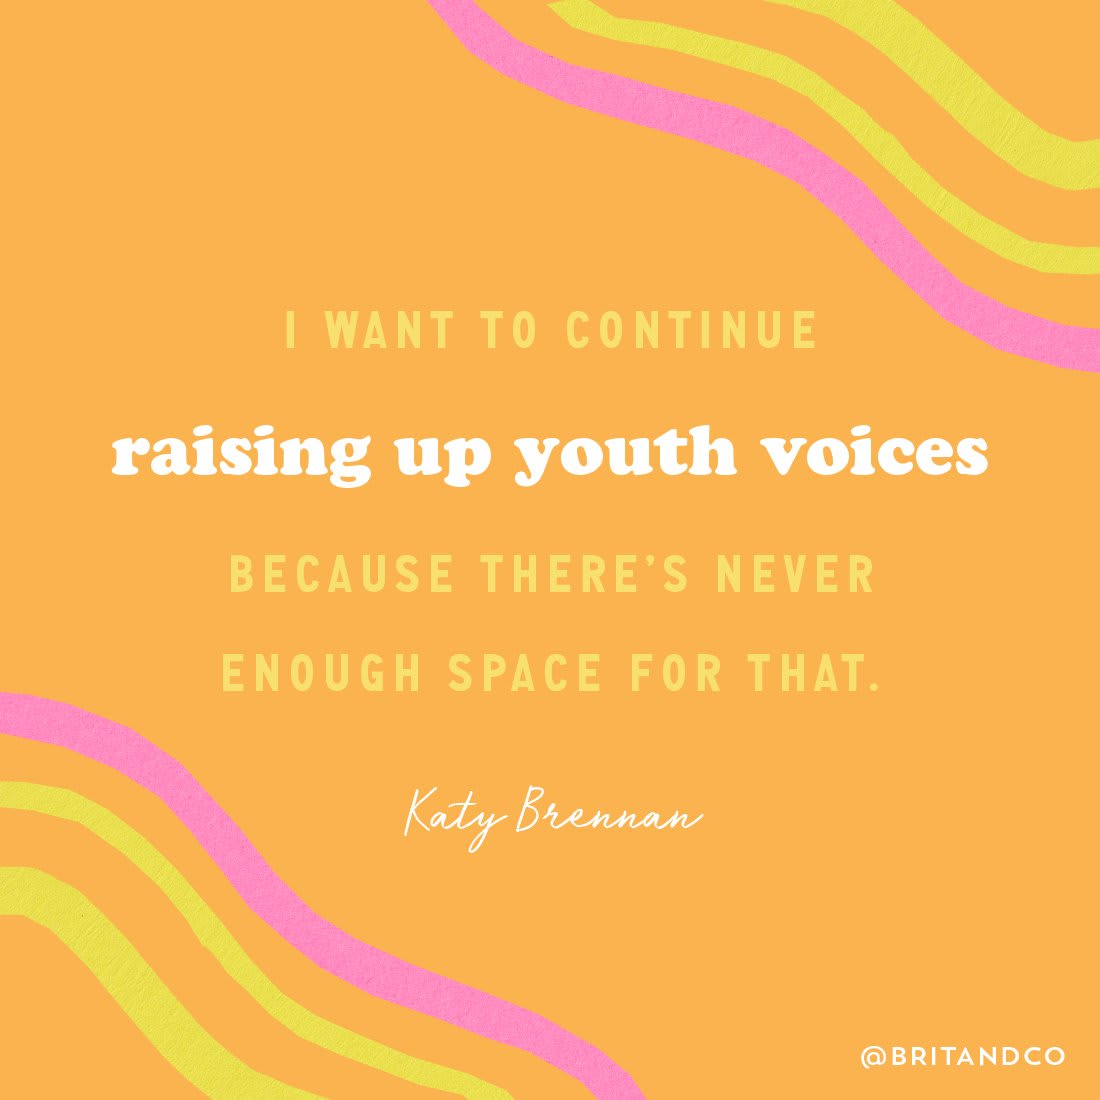 Every voice deserves to be heard. Since she was diagnosed with EDS at 14, now 16-year-old @katy_brennan7 has been an advocate for disability rights. Her mission? To diversify your point of view and impact her generation. Read more: